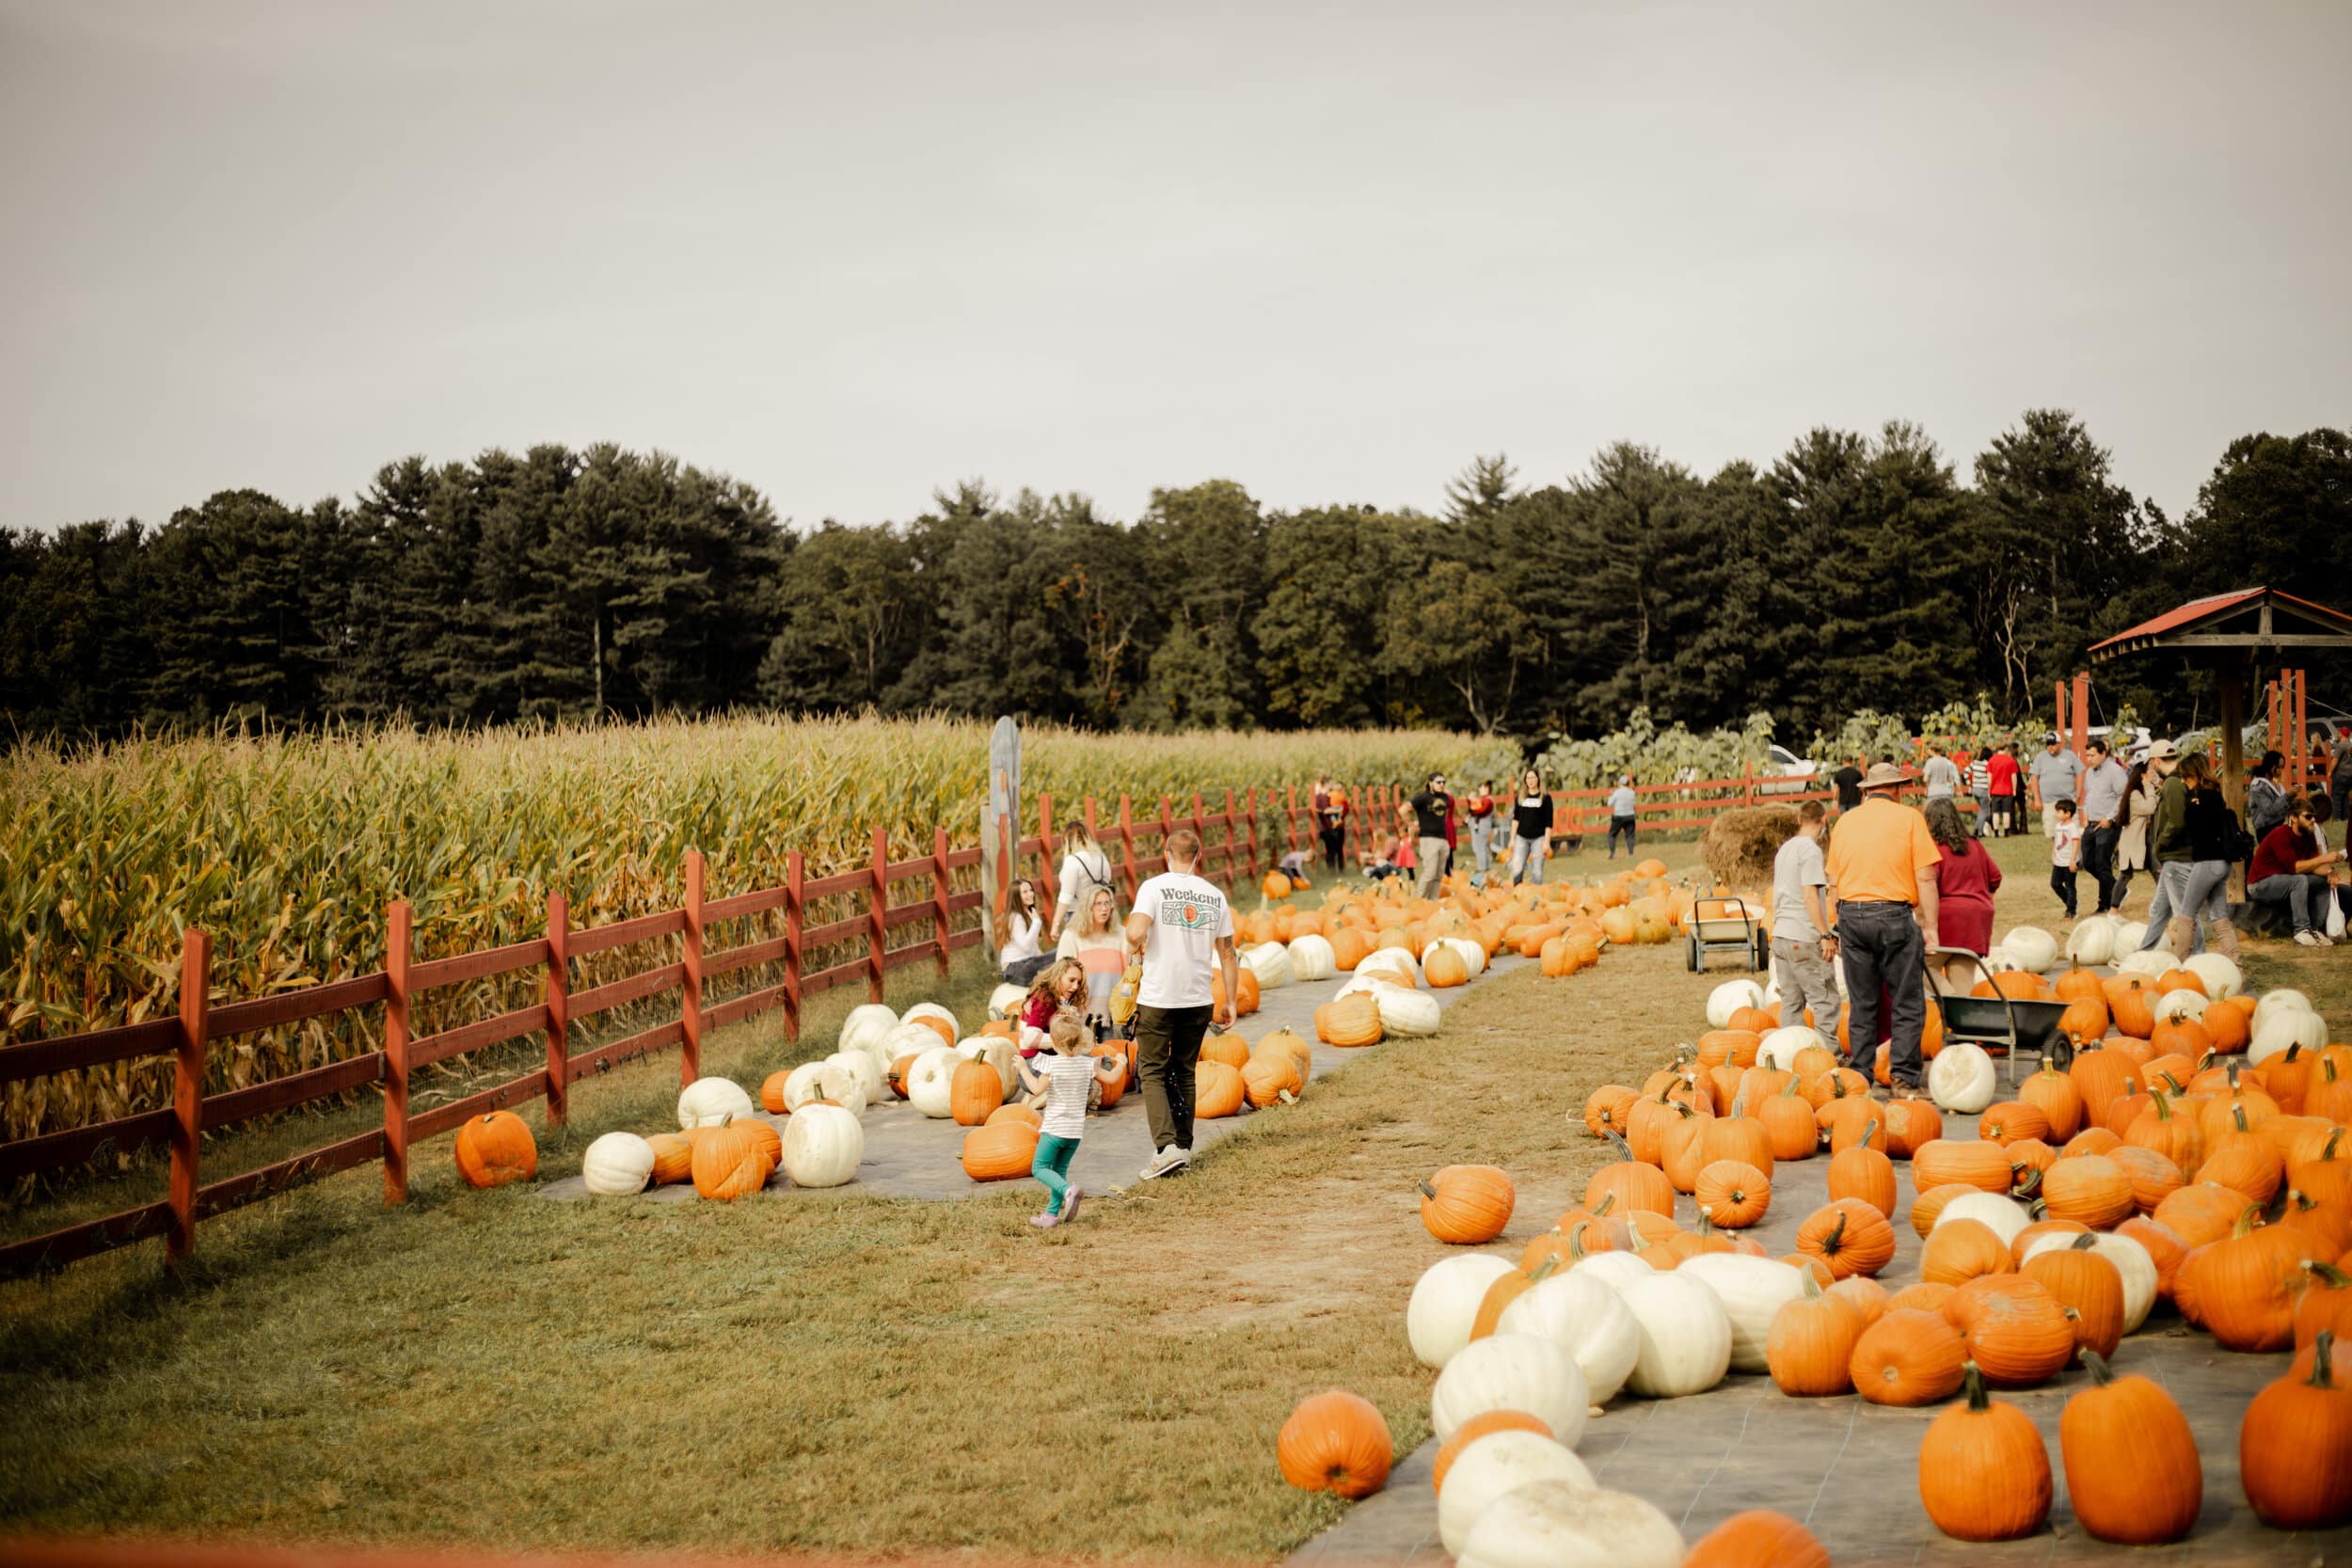 Apples arent the only thing you can pick at Grandads. A pumpkin patch also awaits.